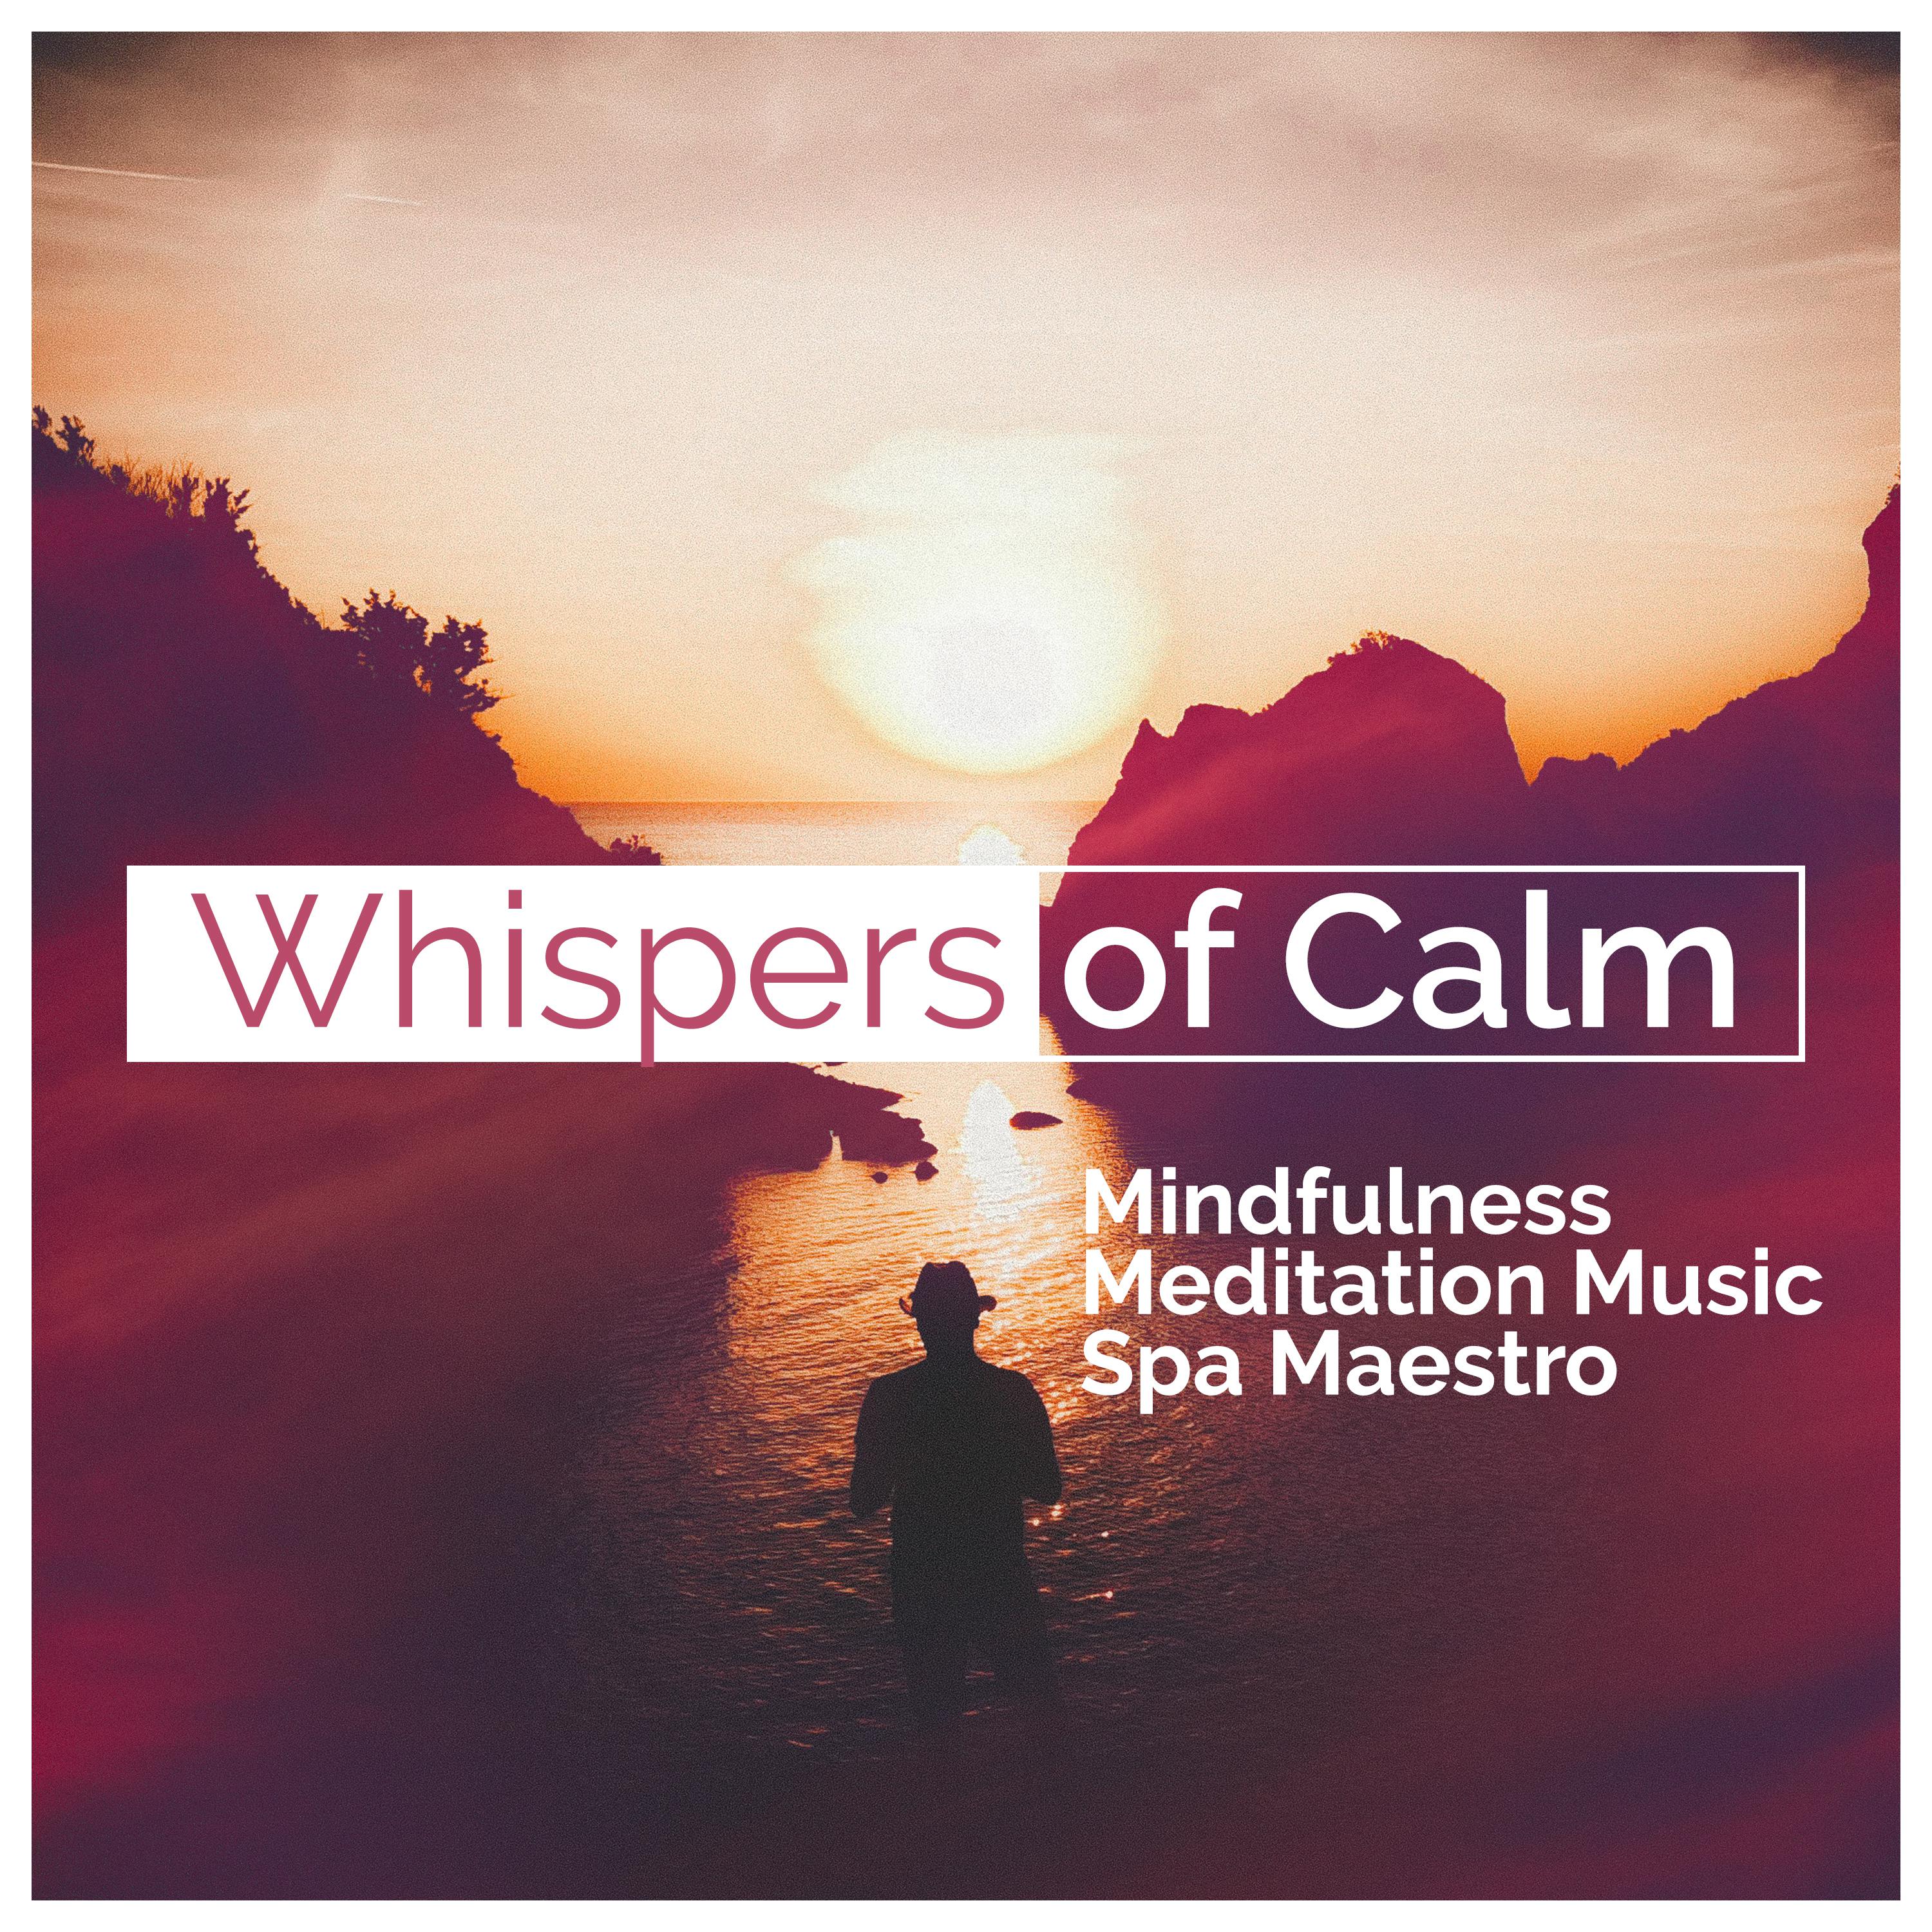 Whispers of Calm